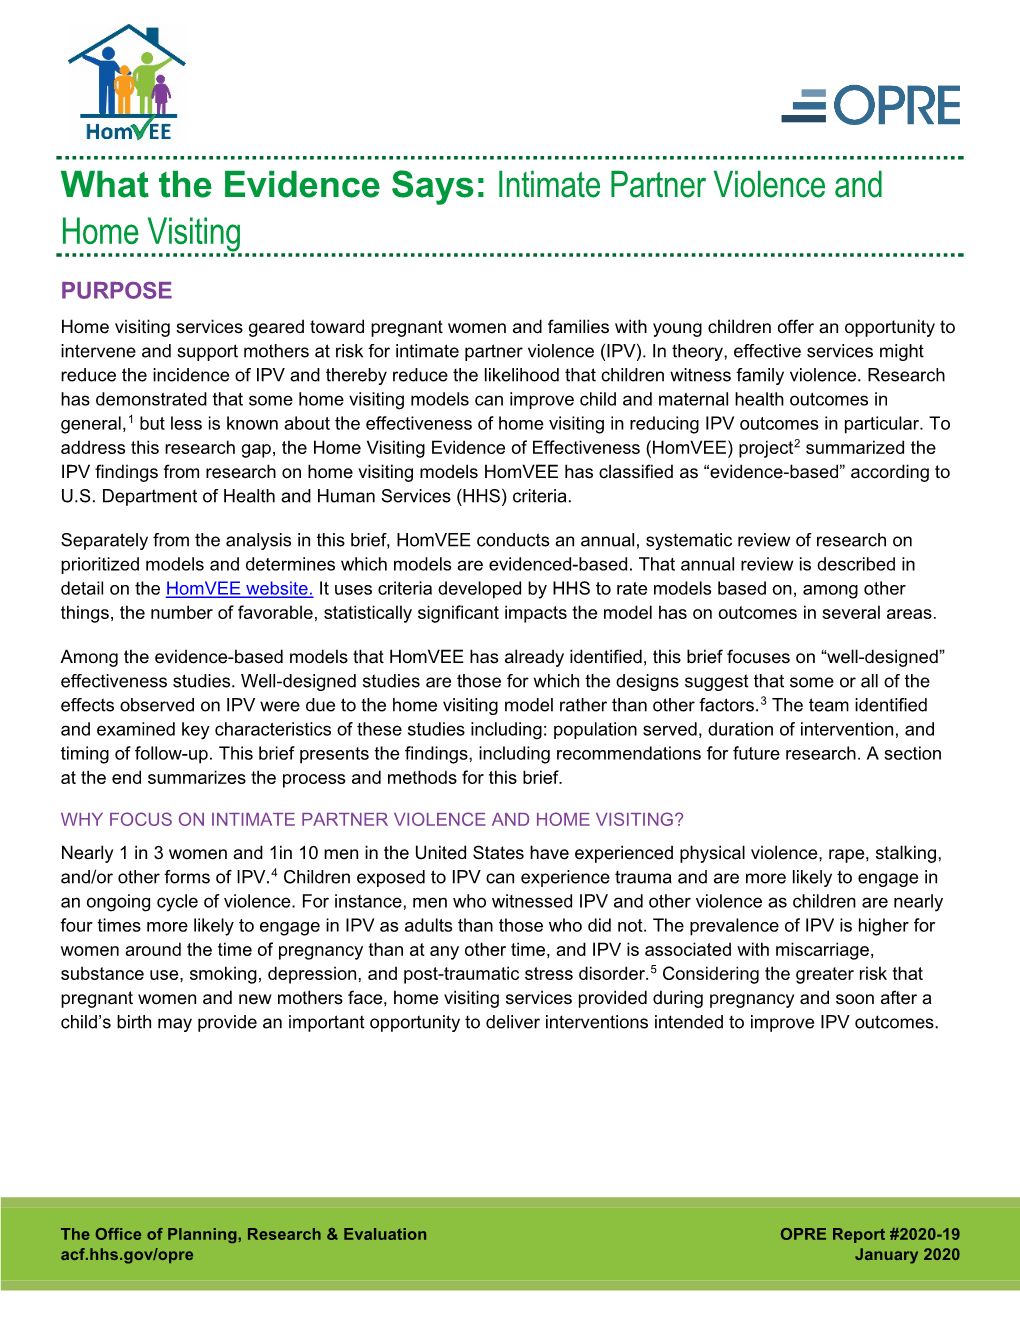 Intimate Partner Violence and Home Visiting